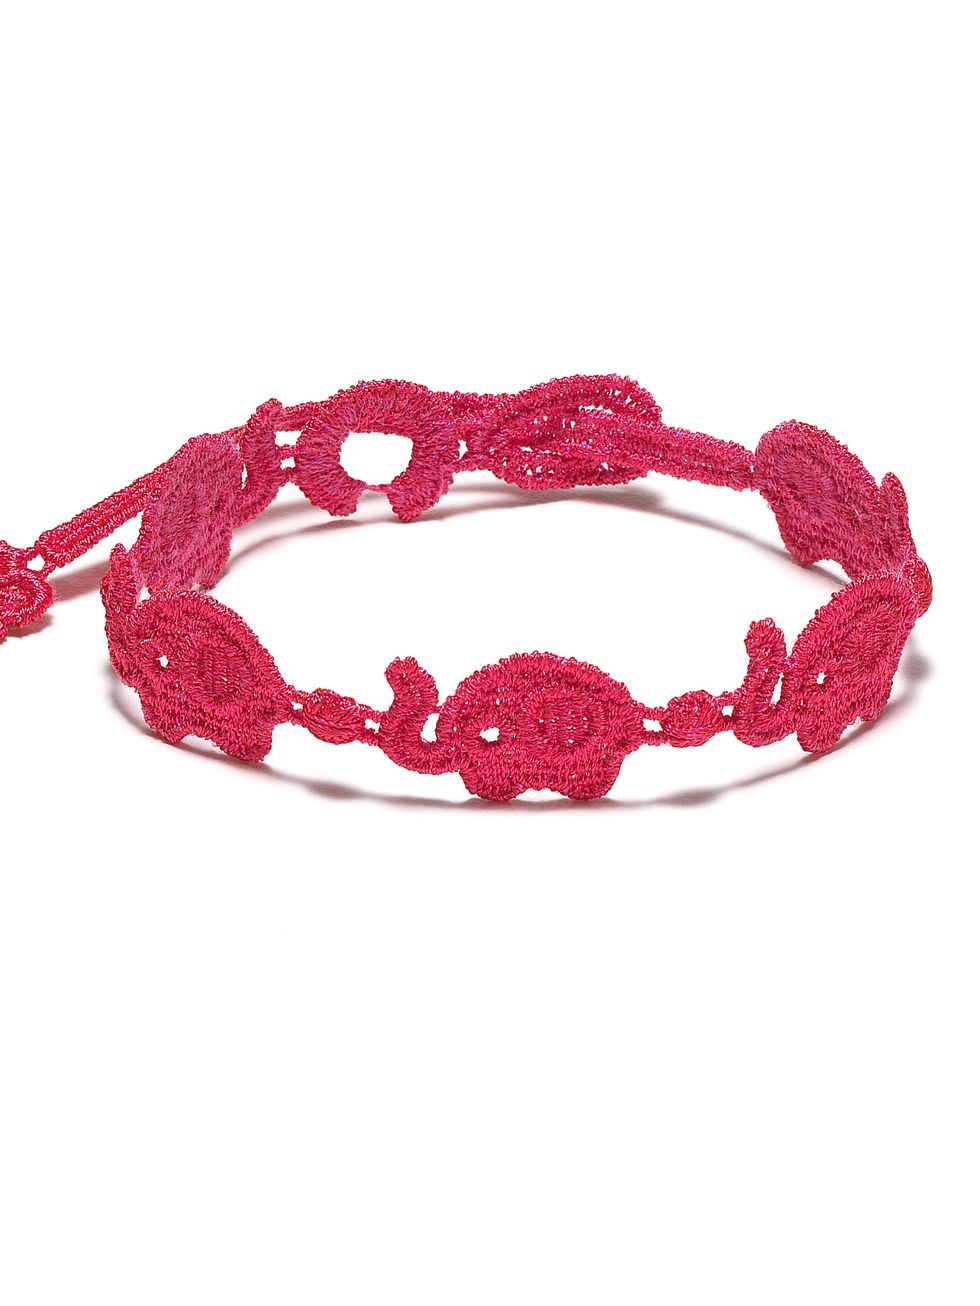 Carmine, Maroon, Natural material, Coquelicot, Ruby, Body jewelry, Bracelet, 